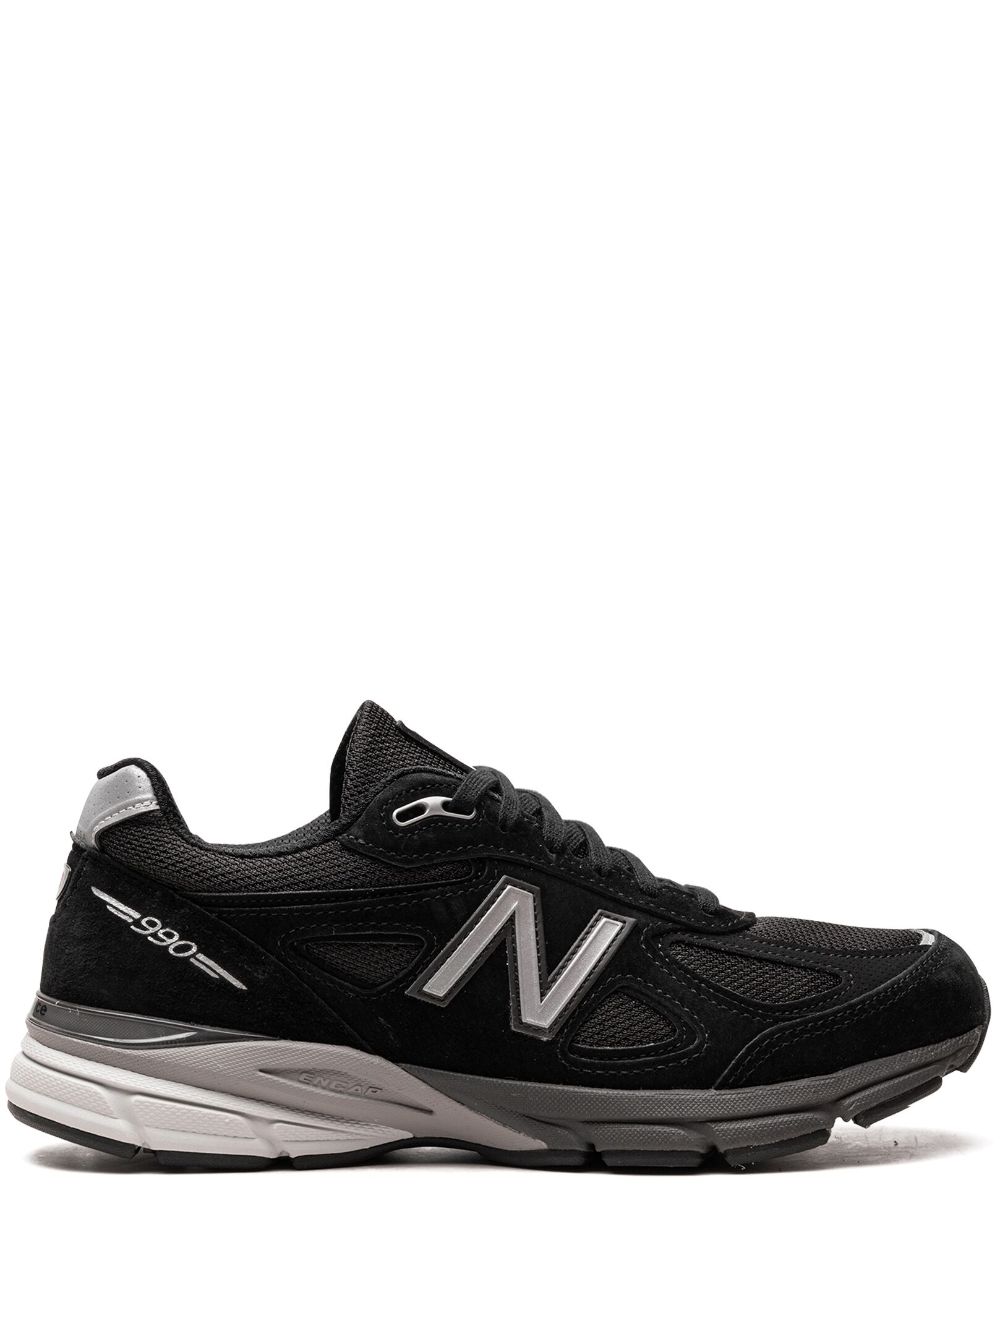 New Balance Made in USA 990v4 "Black/Silver" sneakers